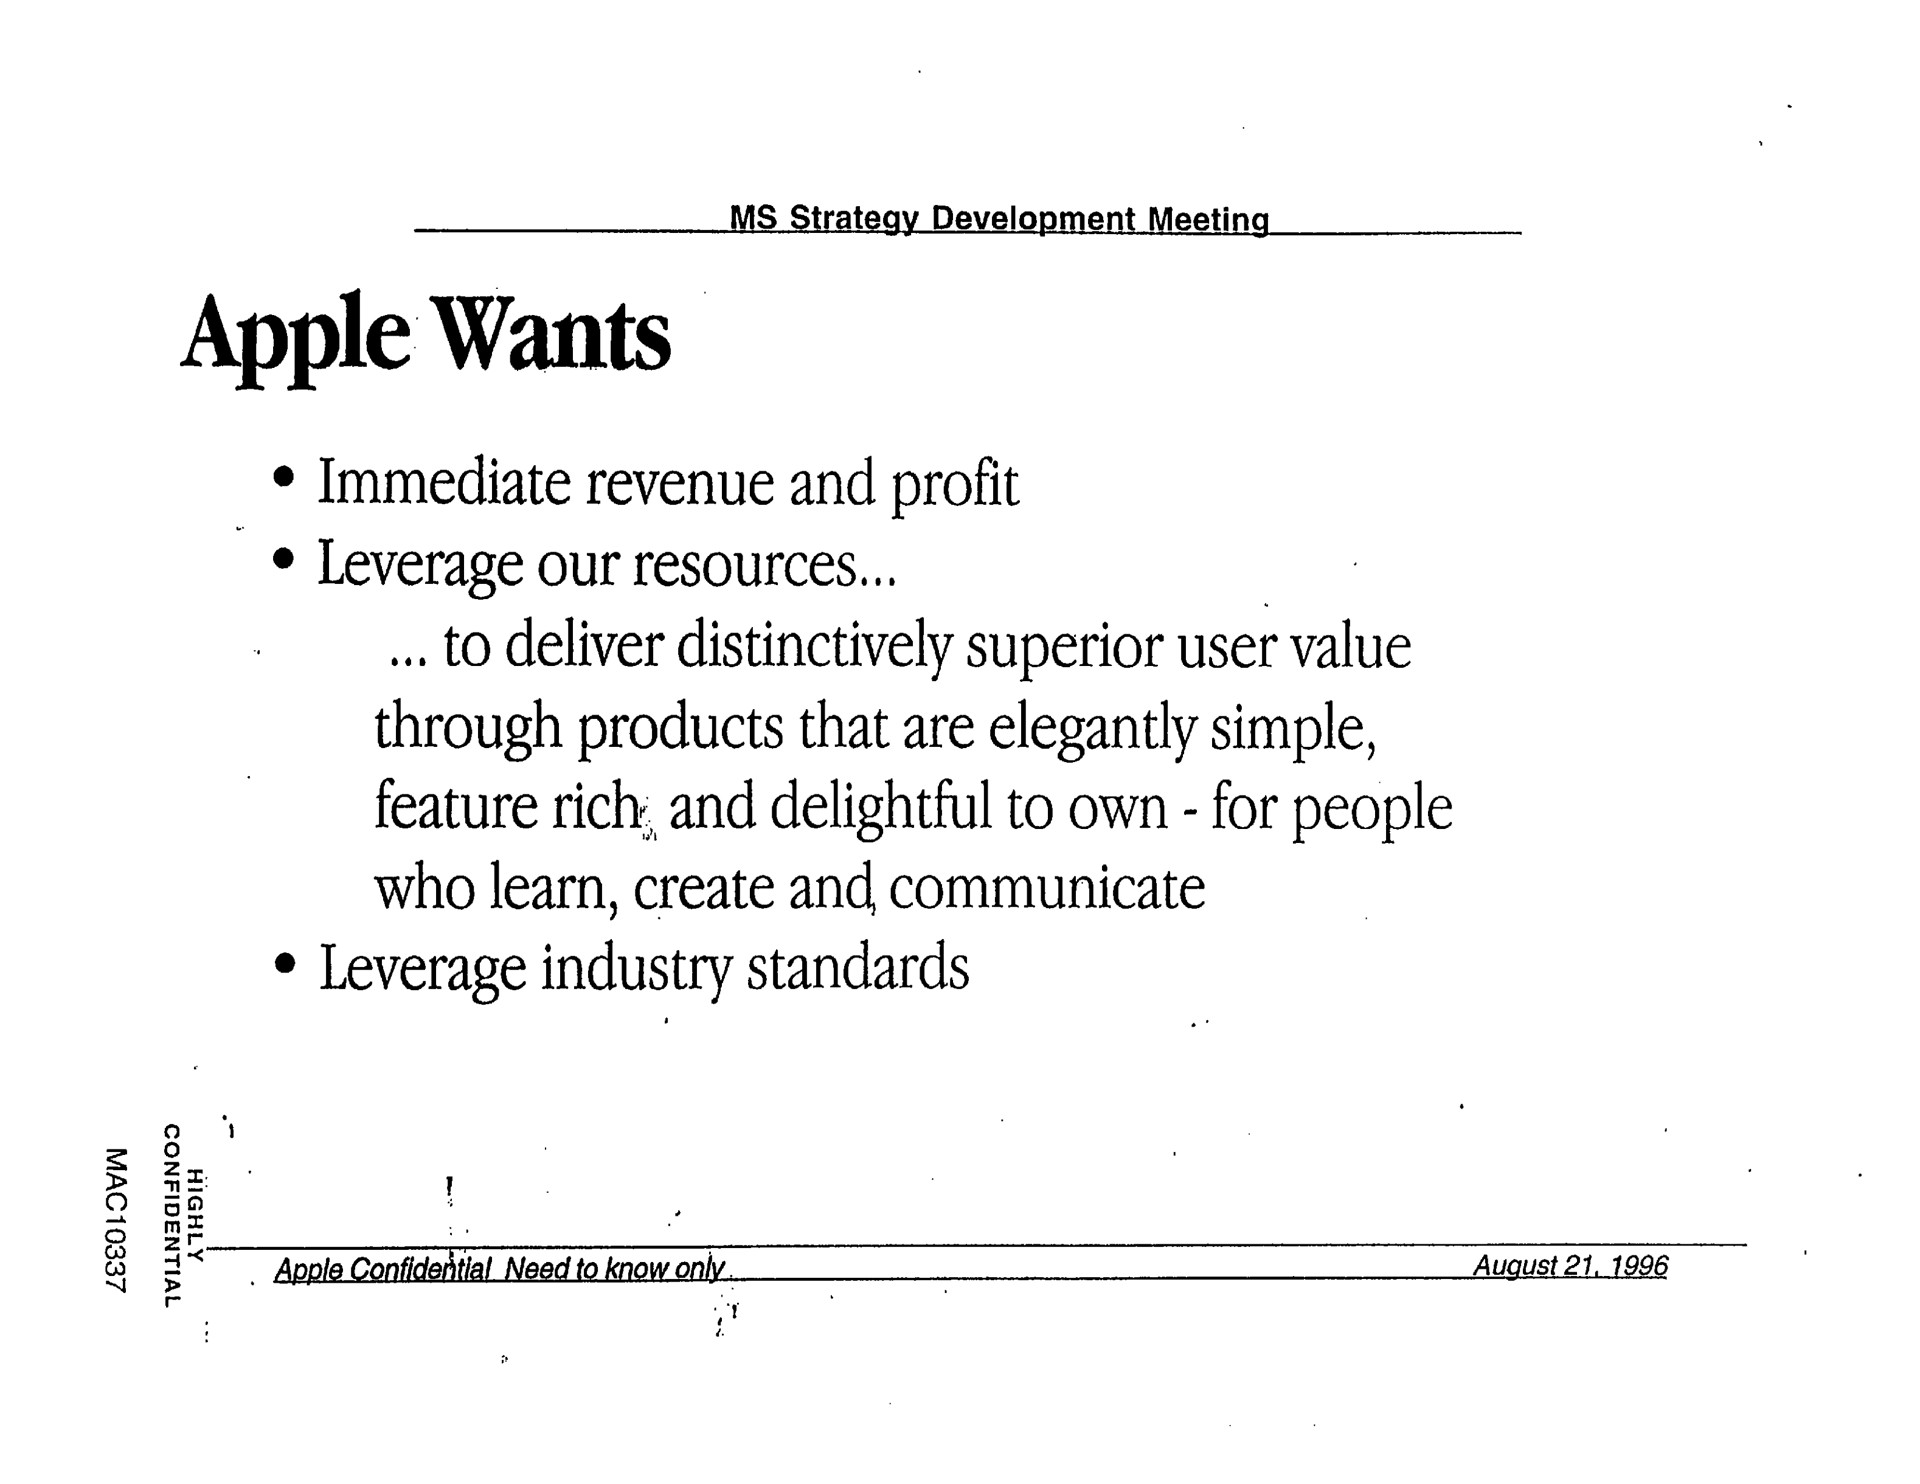 apple wants immediate revenue and profit leverage our resources to deliver distinctively superior user value through products that are elegantly simple feature rich and delightful to own for people who learn create and communicate leverage industry standards | Apple